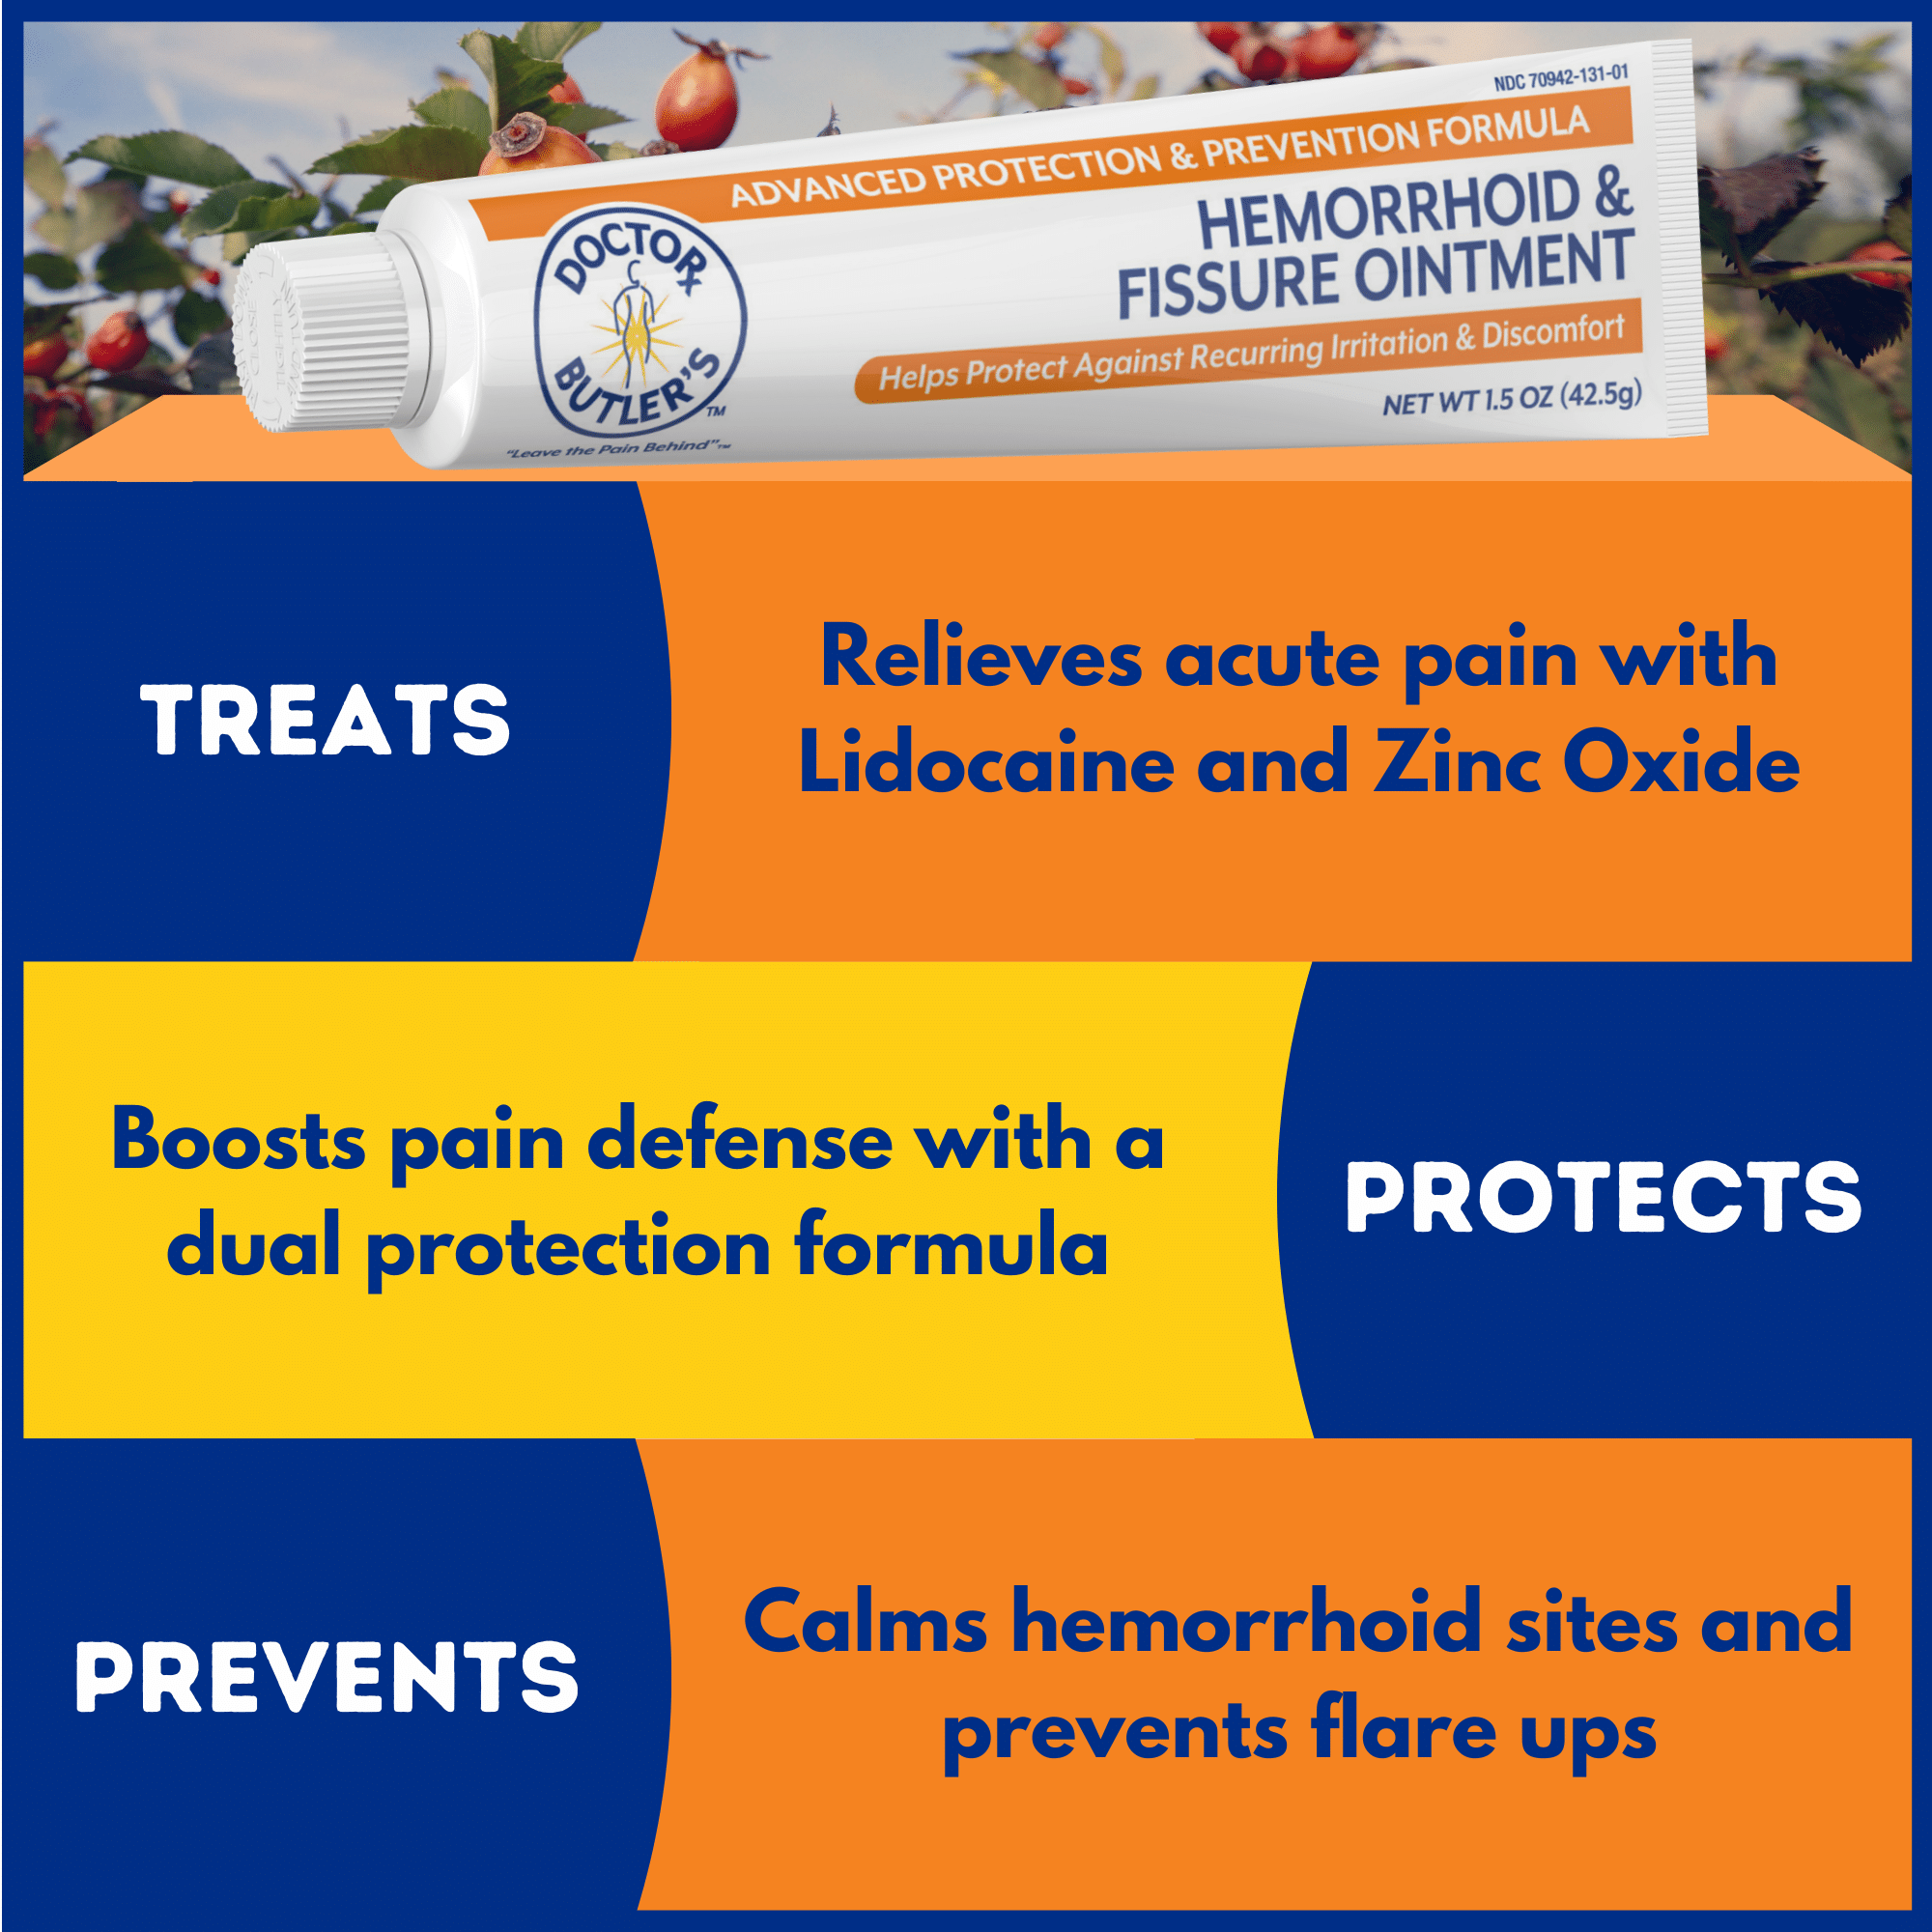 Advanced Protection Hemorrhoid & Fissure Ointment